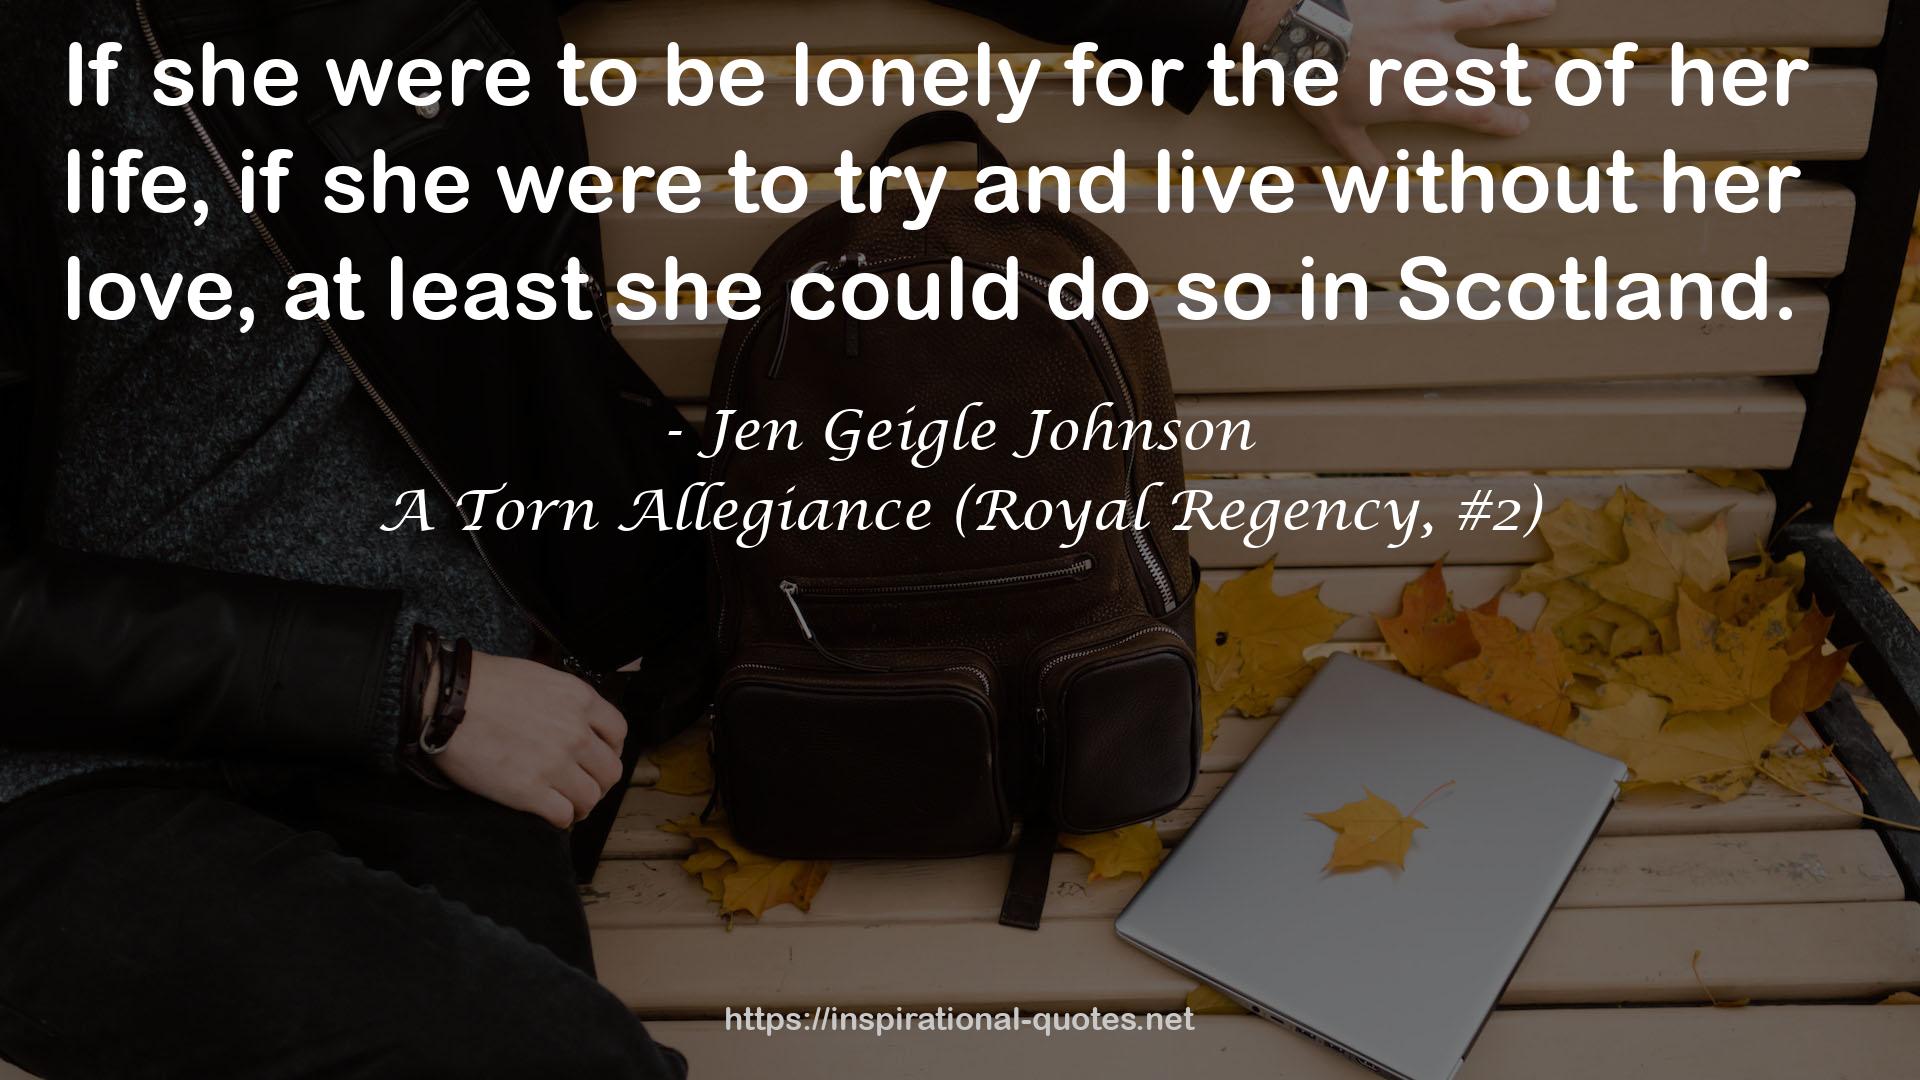 A Torn Allegiance (Royal Regency, #2) QUOTES